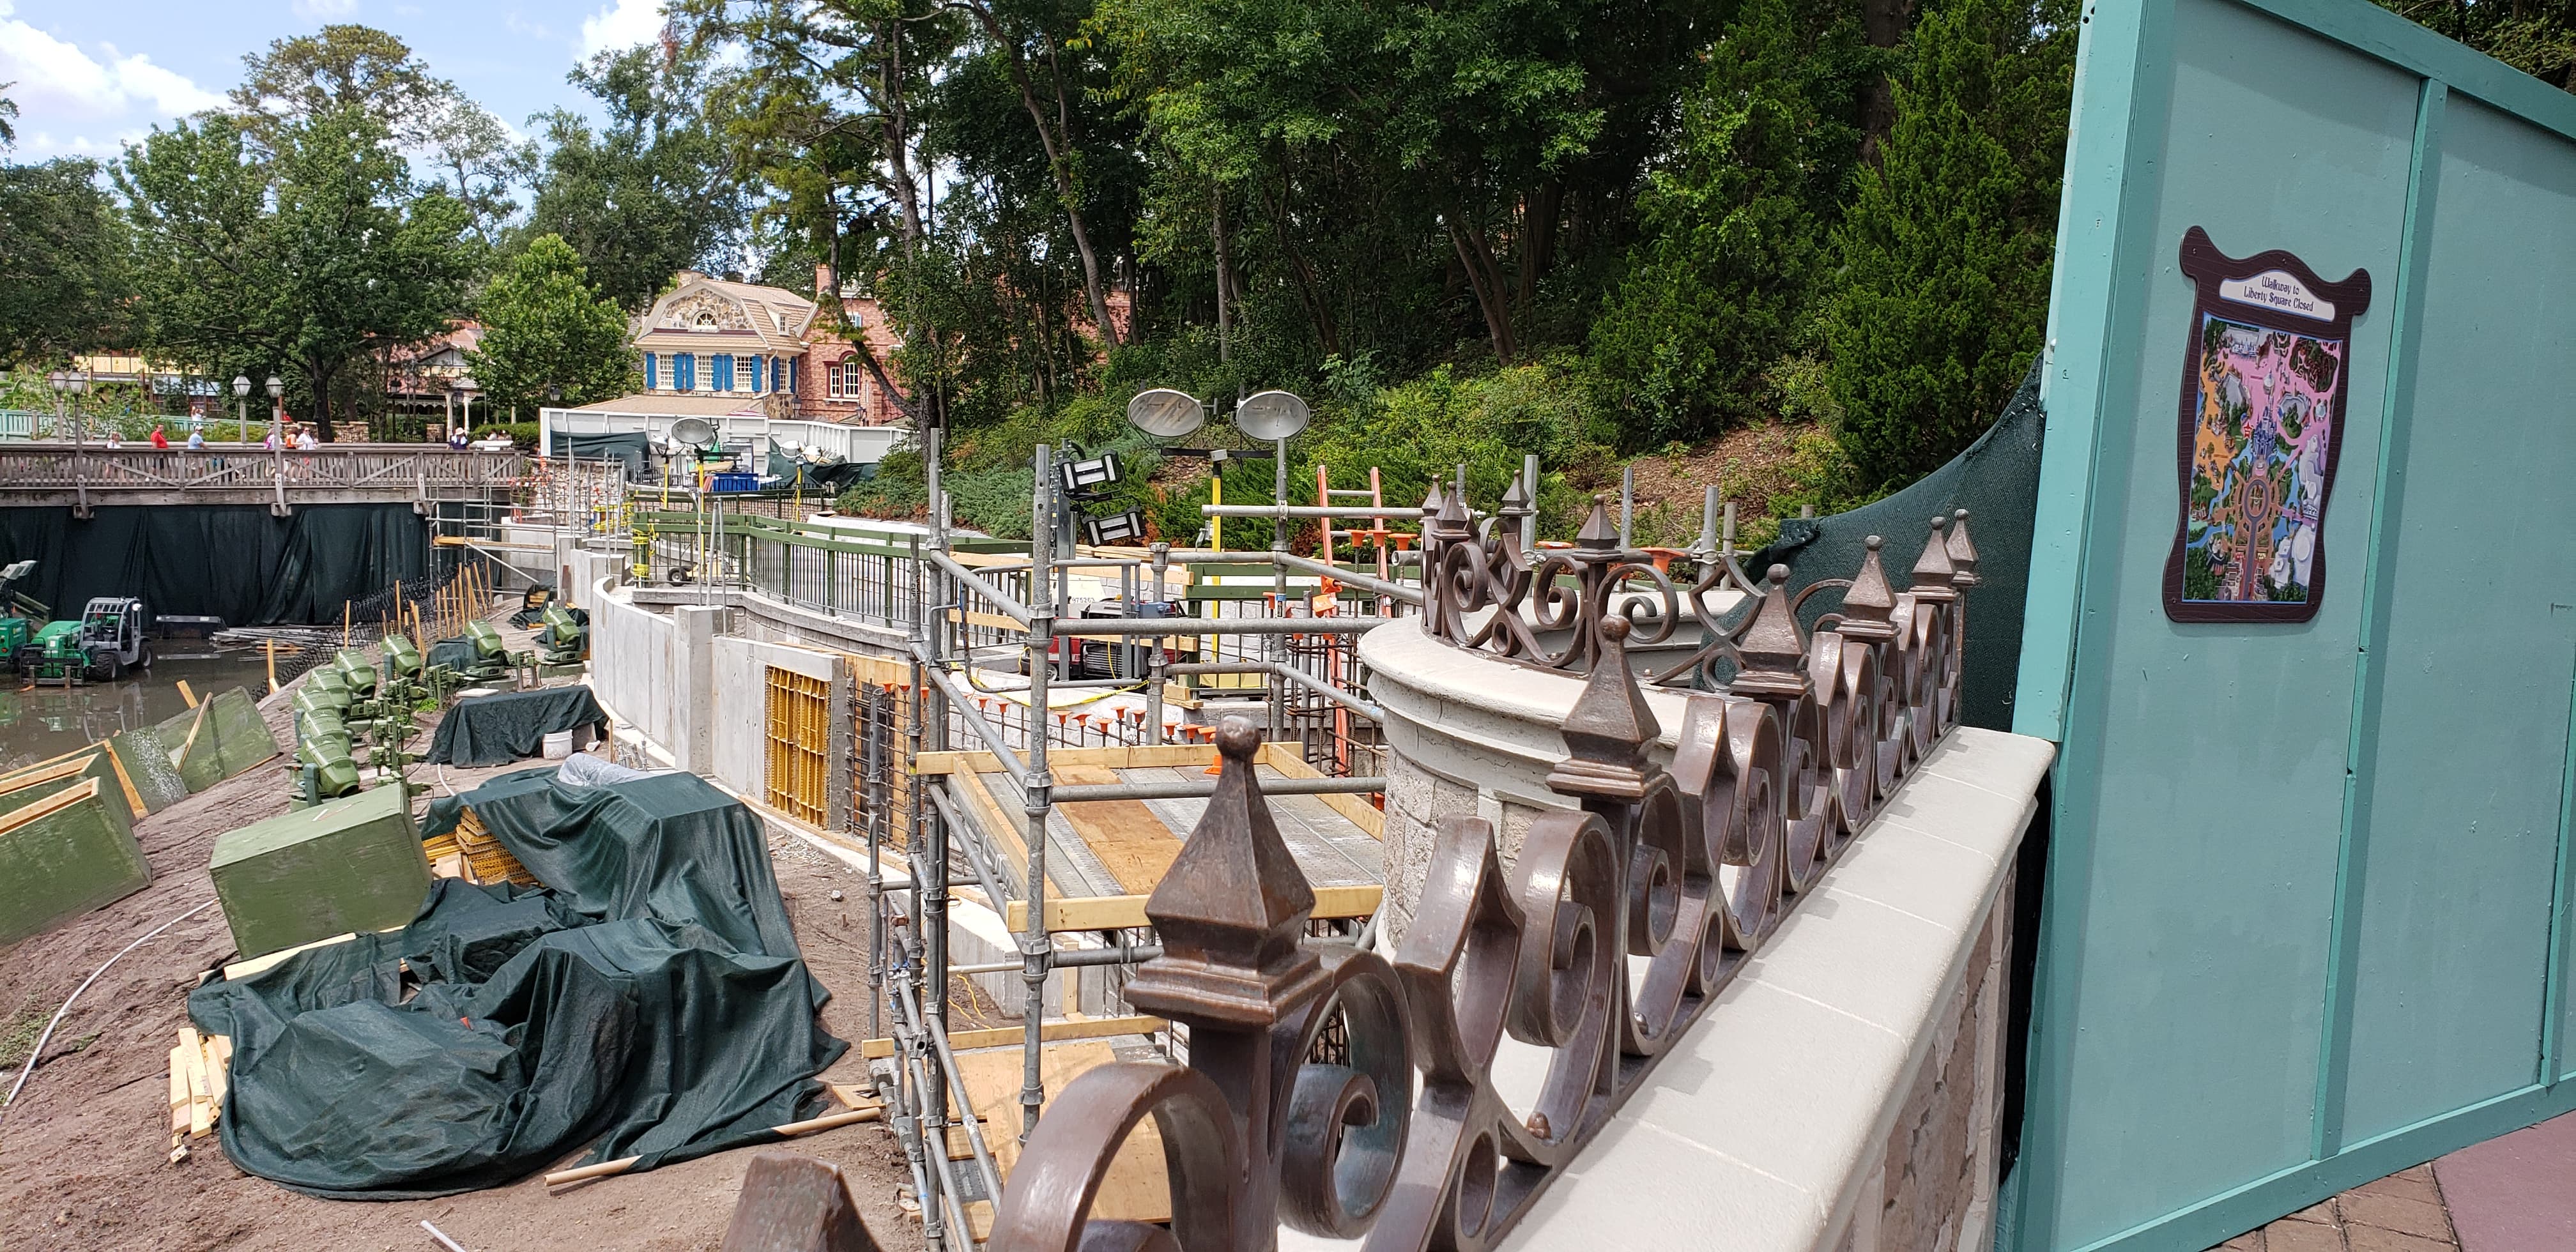 More New Photos of the Moat Construction at the Magic Kingdom